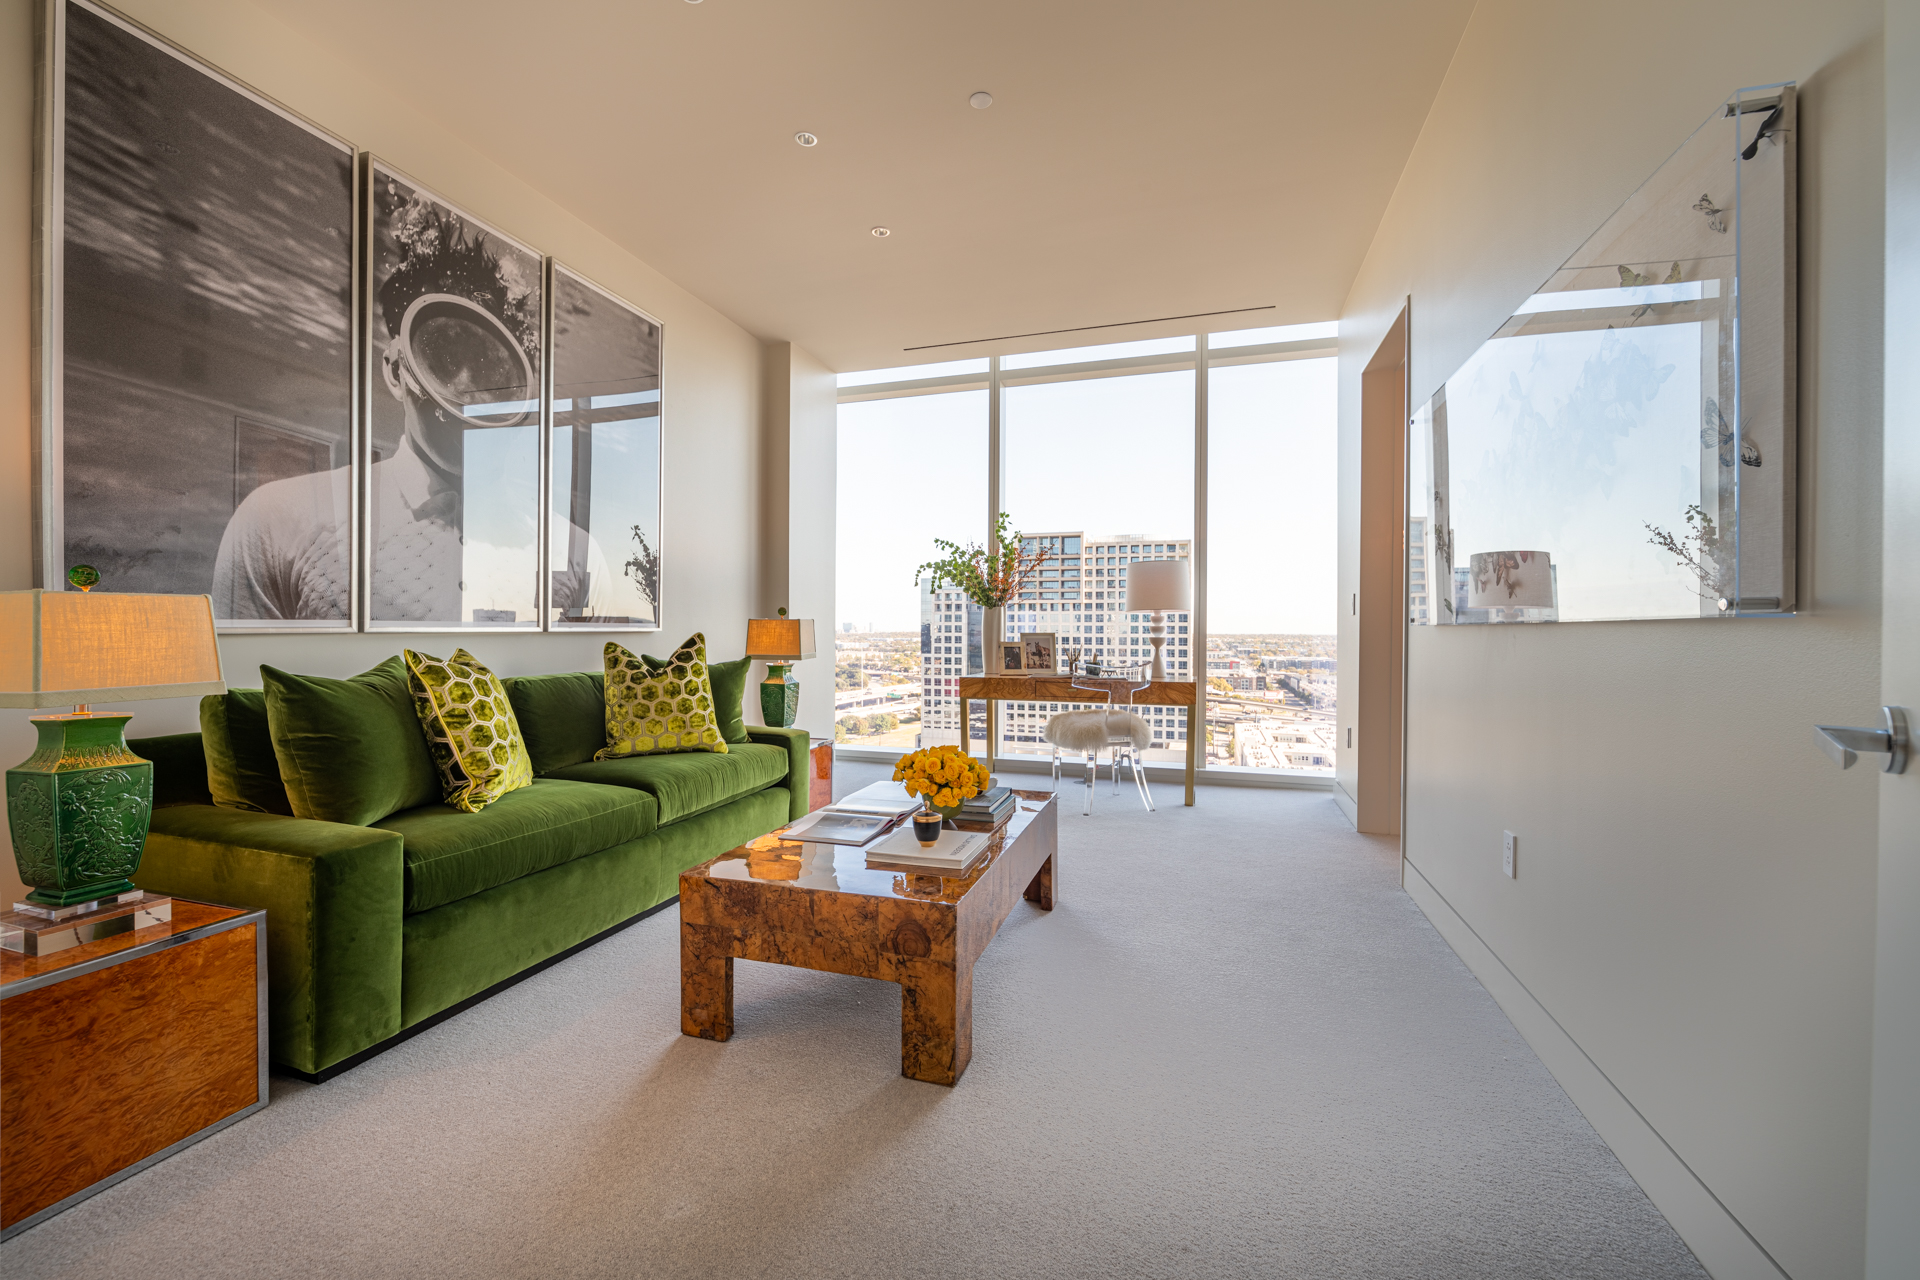 Room with green couch and desk with city views.